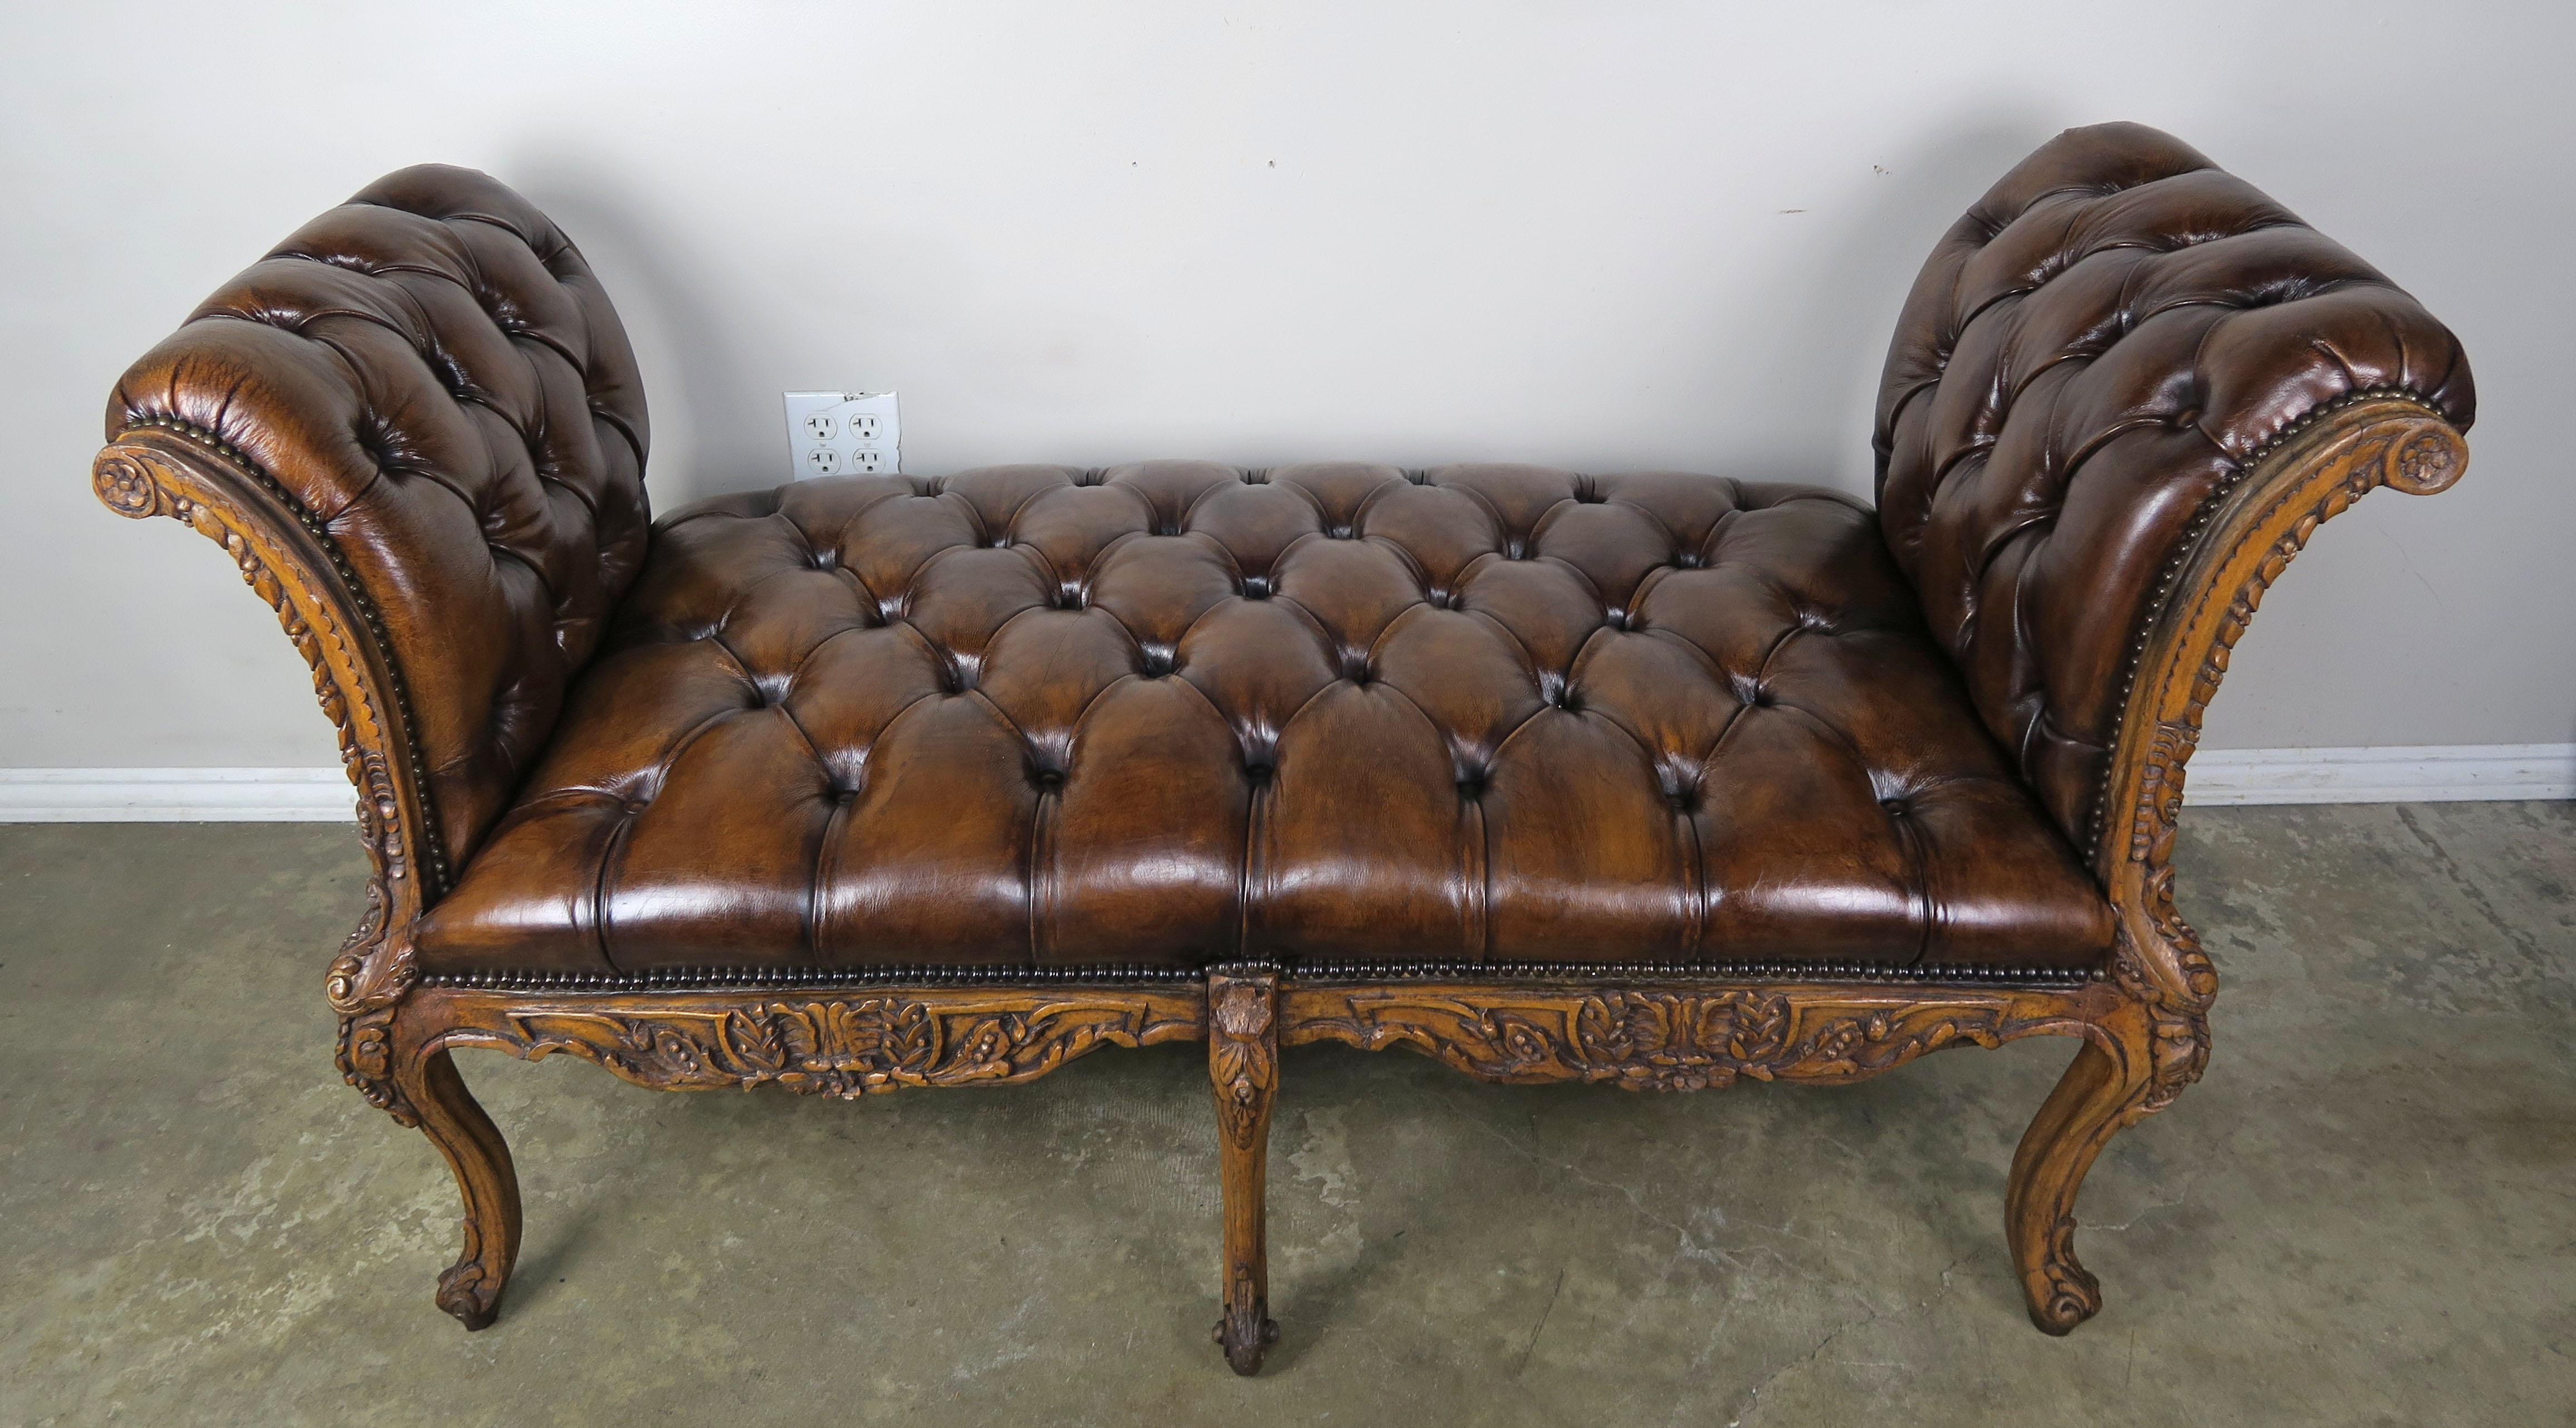 19th century French leather tufted bench that stands on six ornately carved cabriole legs that end in rams head feet. The bench is fabricated from walnut with parcel gilt detailing. The leather is beautifully distressed with no tears or cracks. The